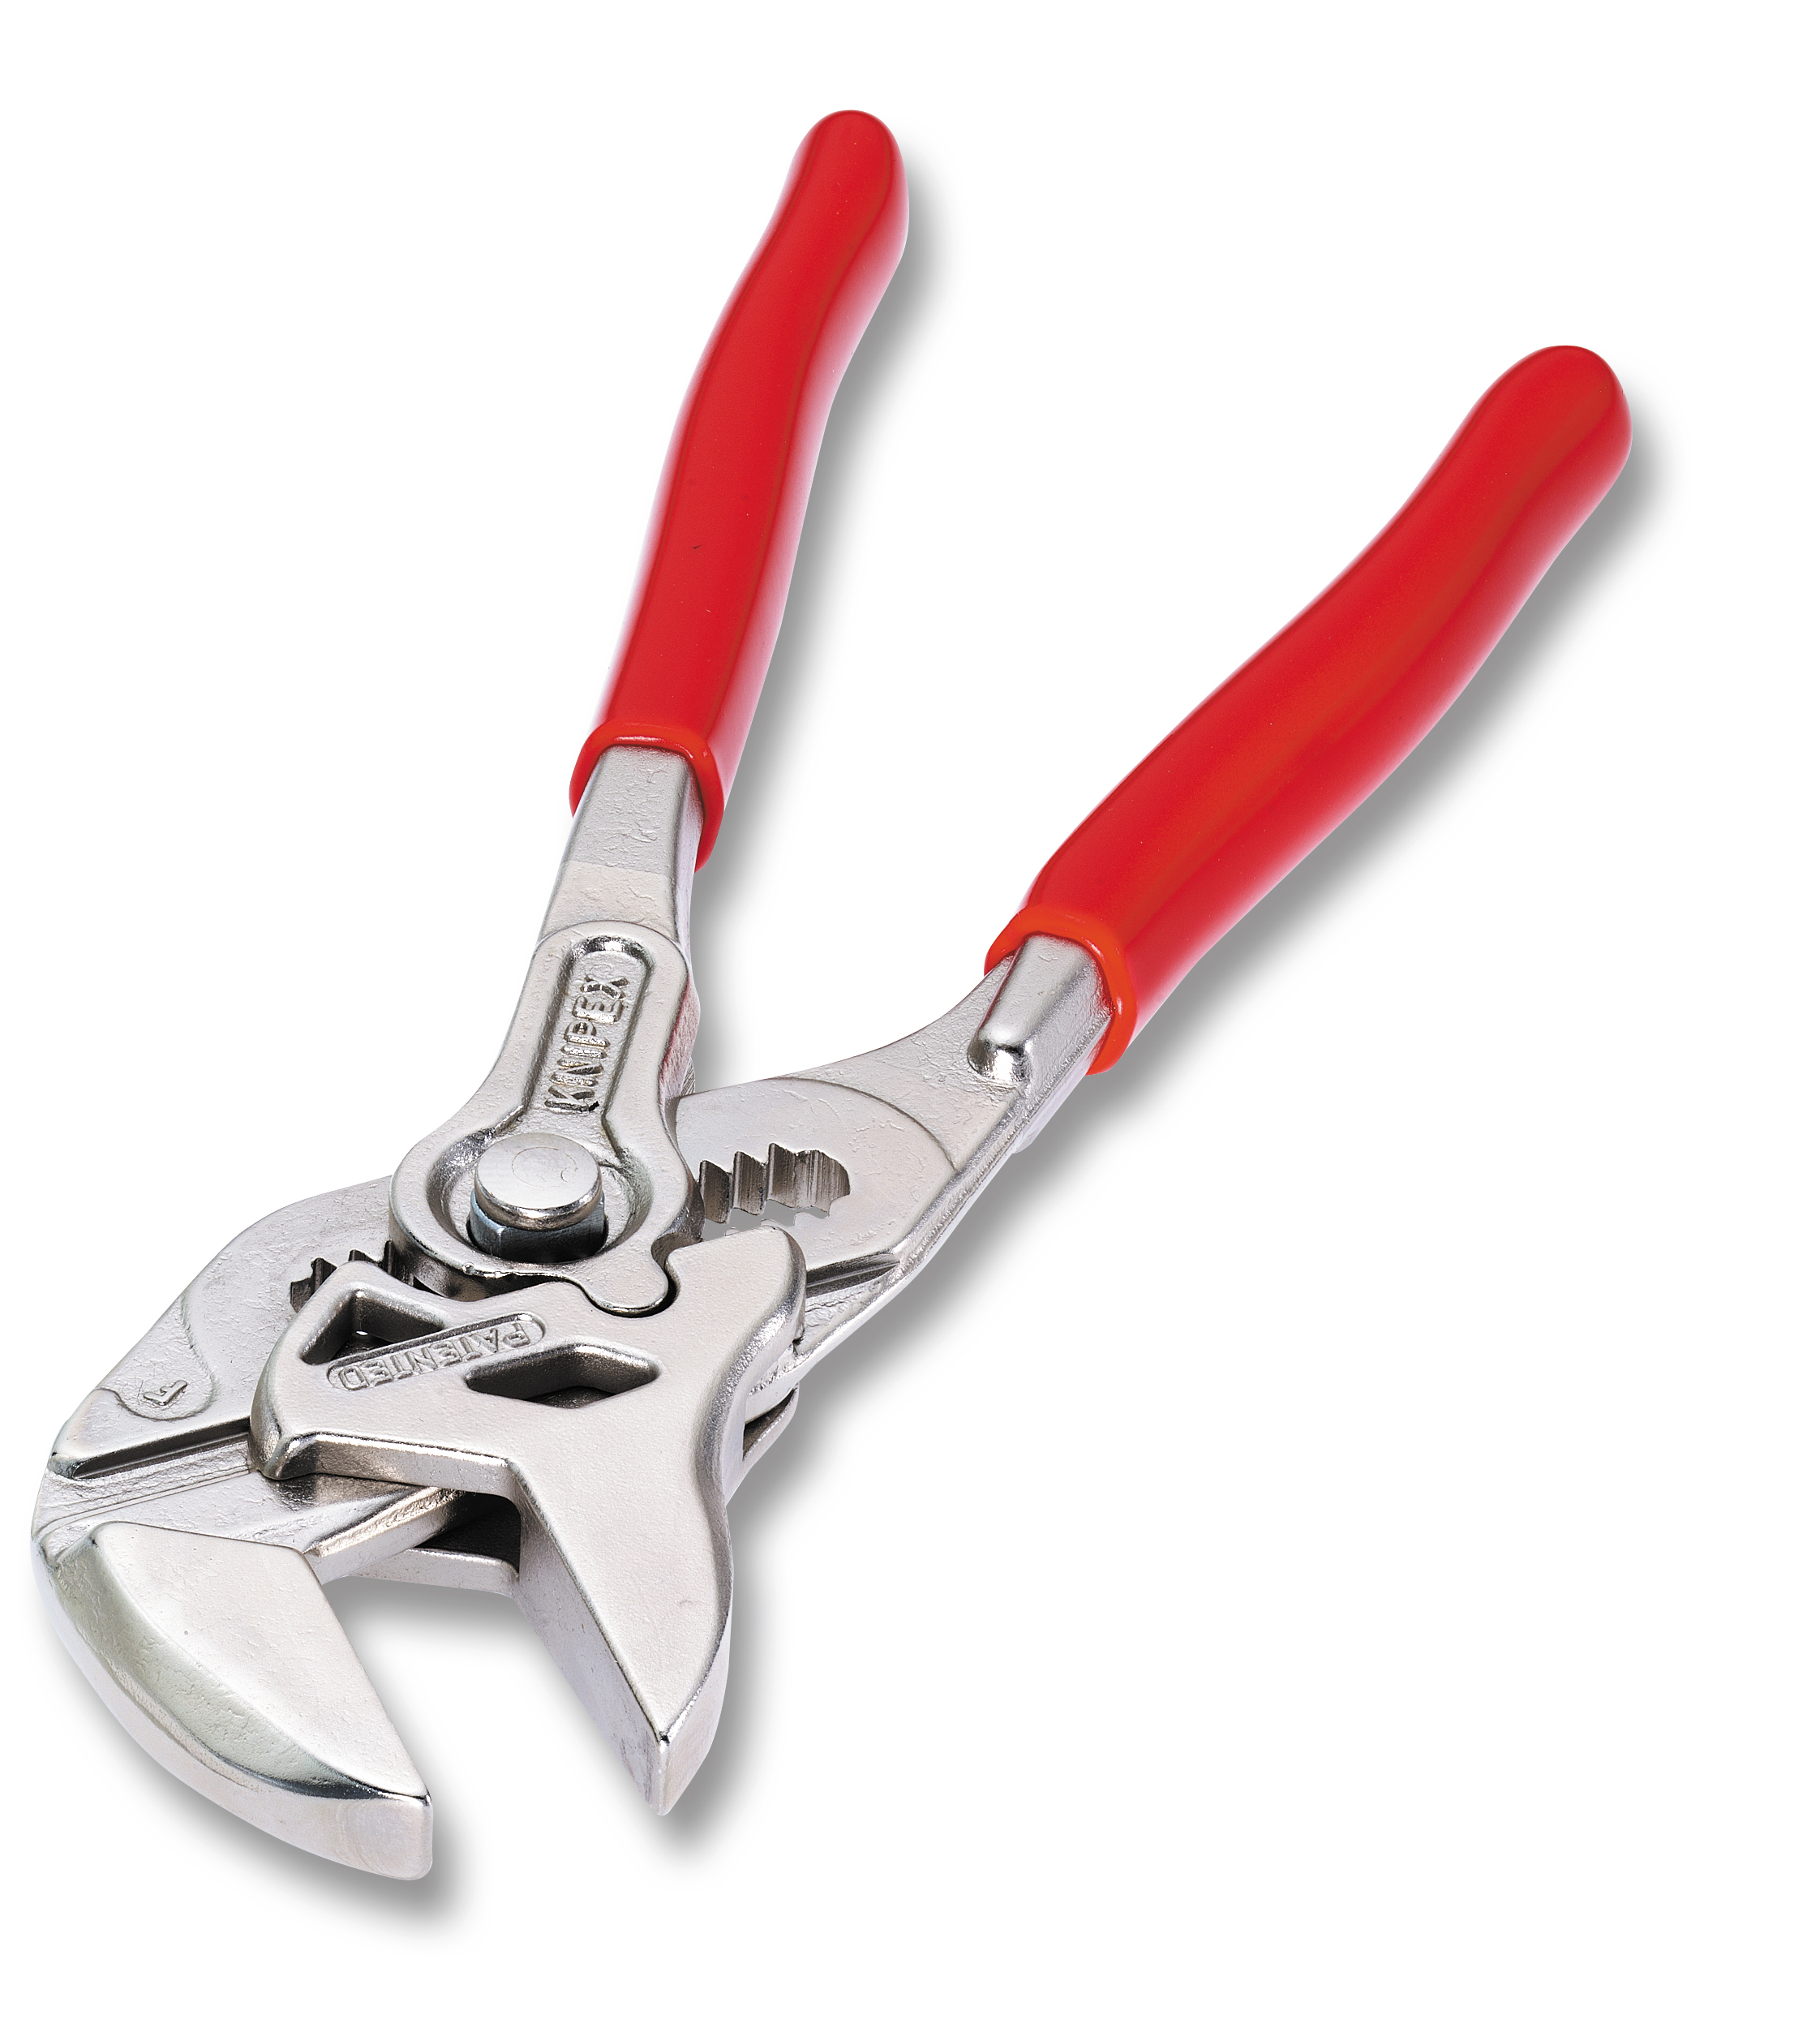 Polygrip pliers, large Knipex